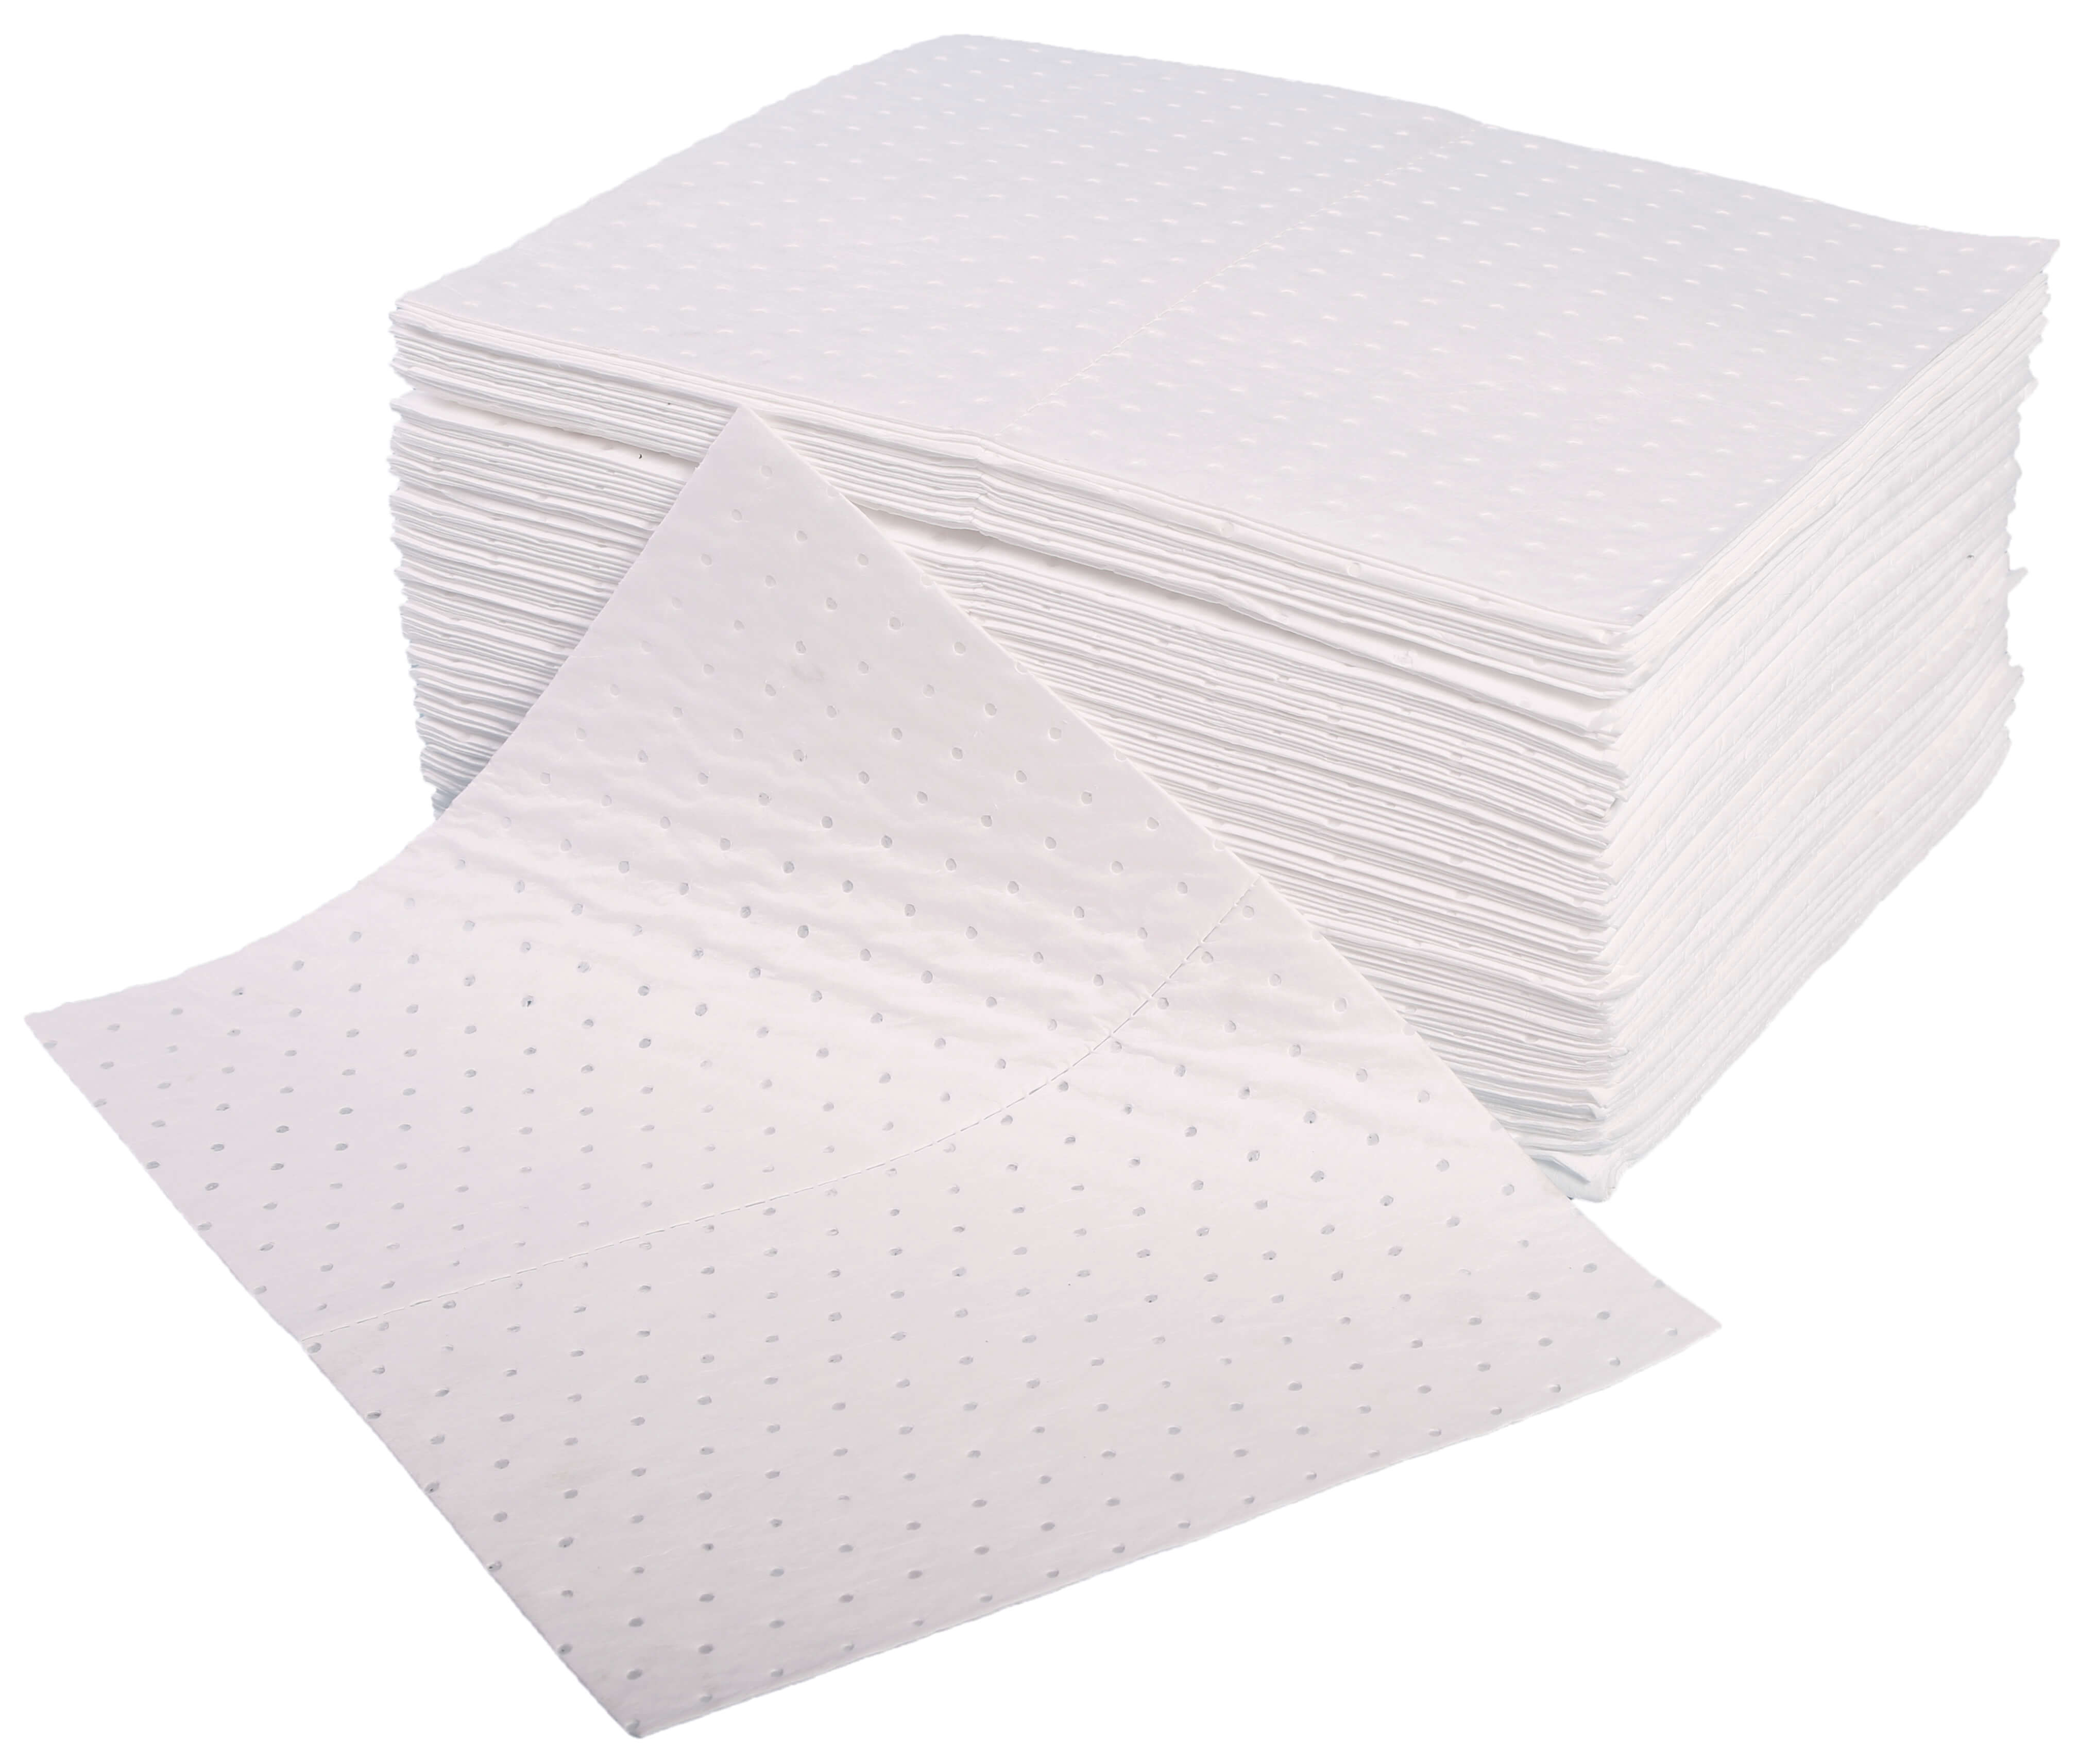 Medium Weight Oil & Fuel Absorbent Pads - Box of 100